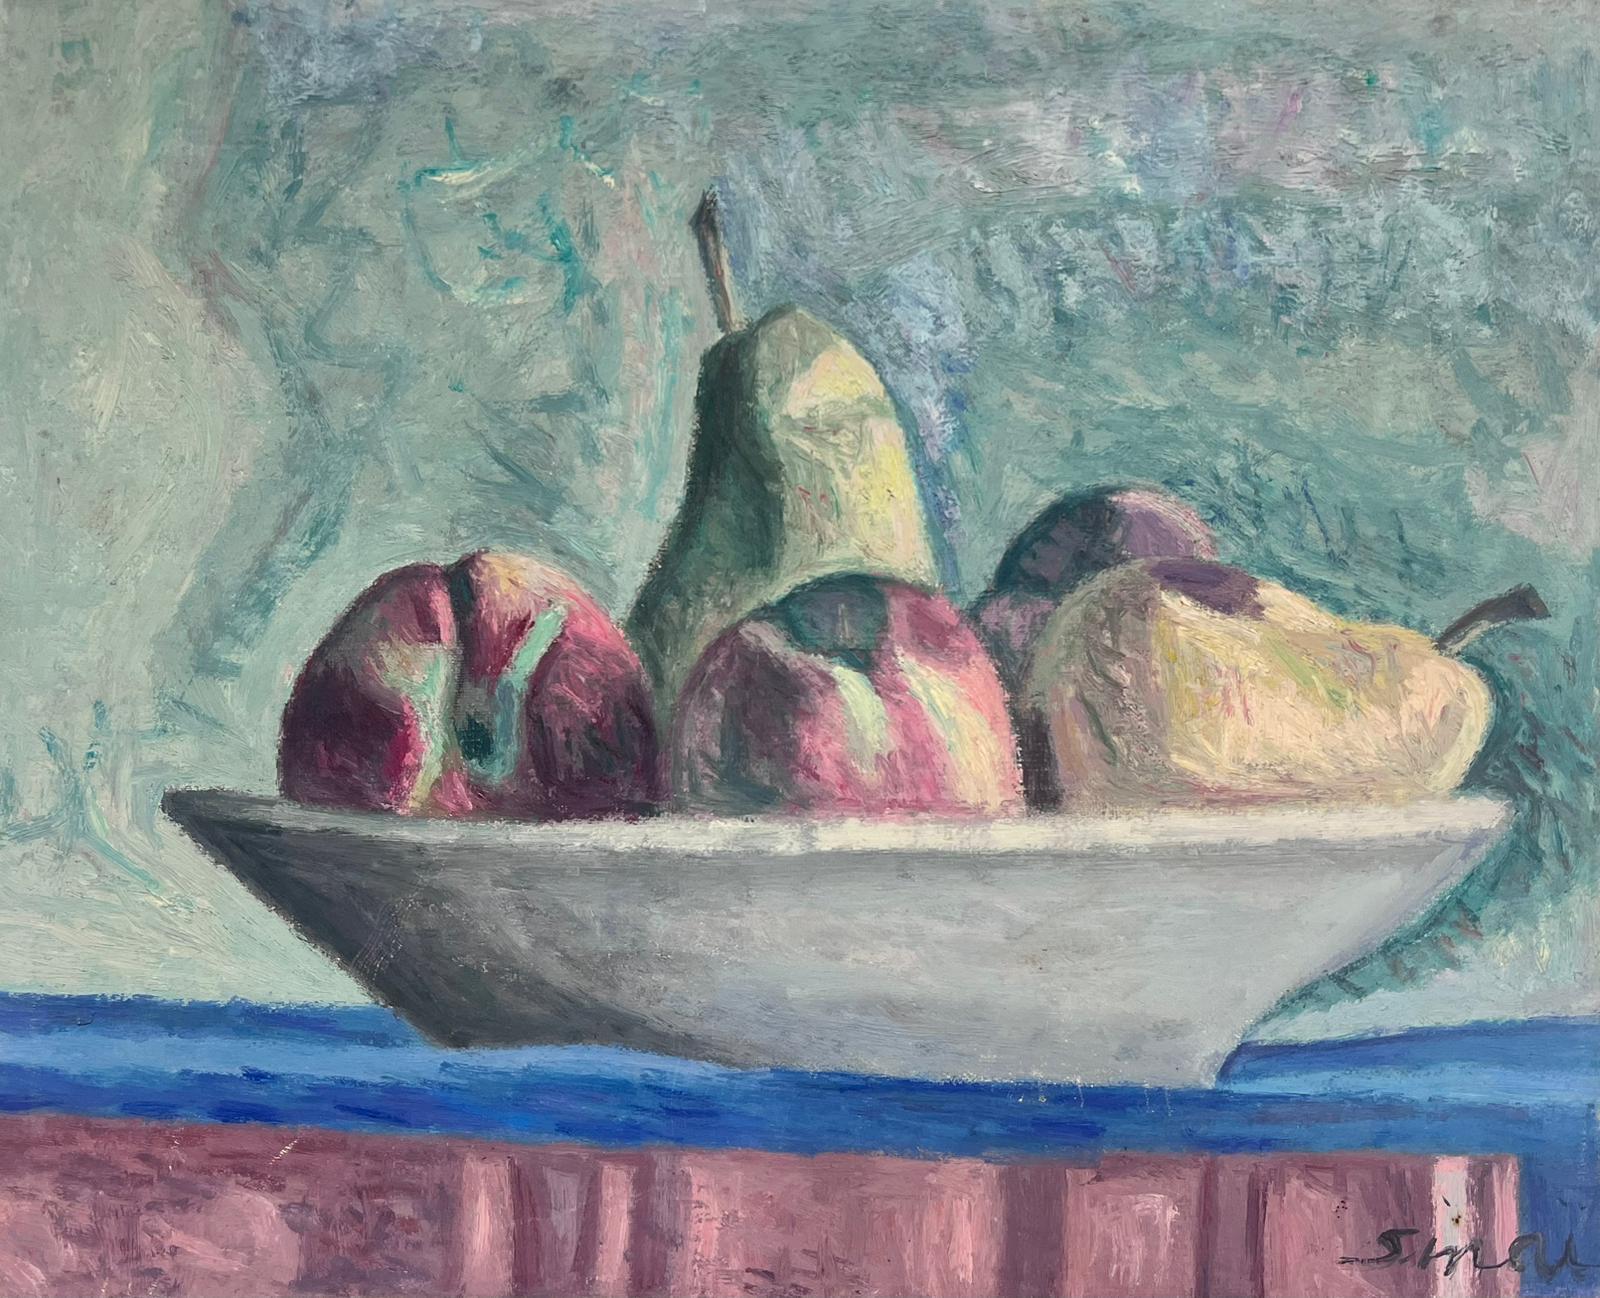 Nature Morte
French School, late 20th century
signed verso
oil painting on canvas, unframed
canvas: 13 x 16 inches
provenance: private collection, France
condition: very good and sound condition 
